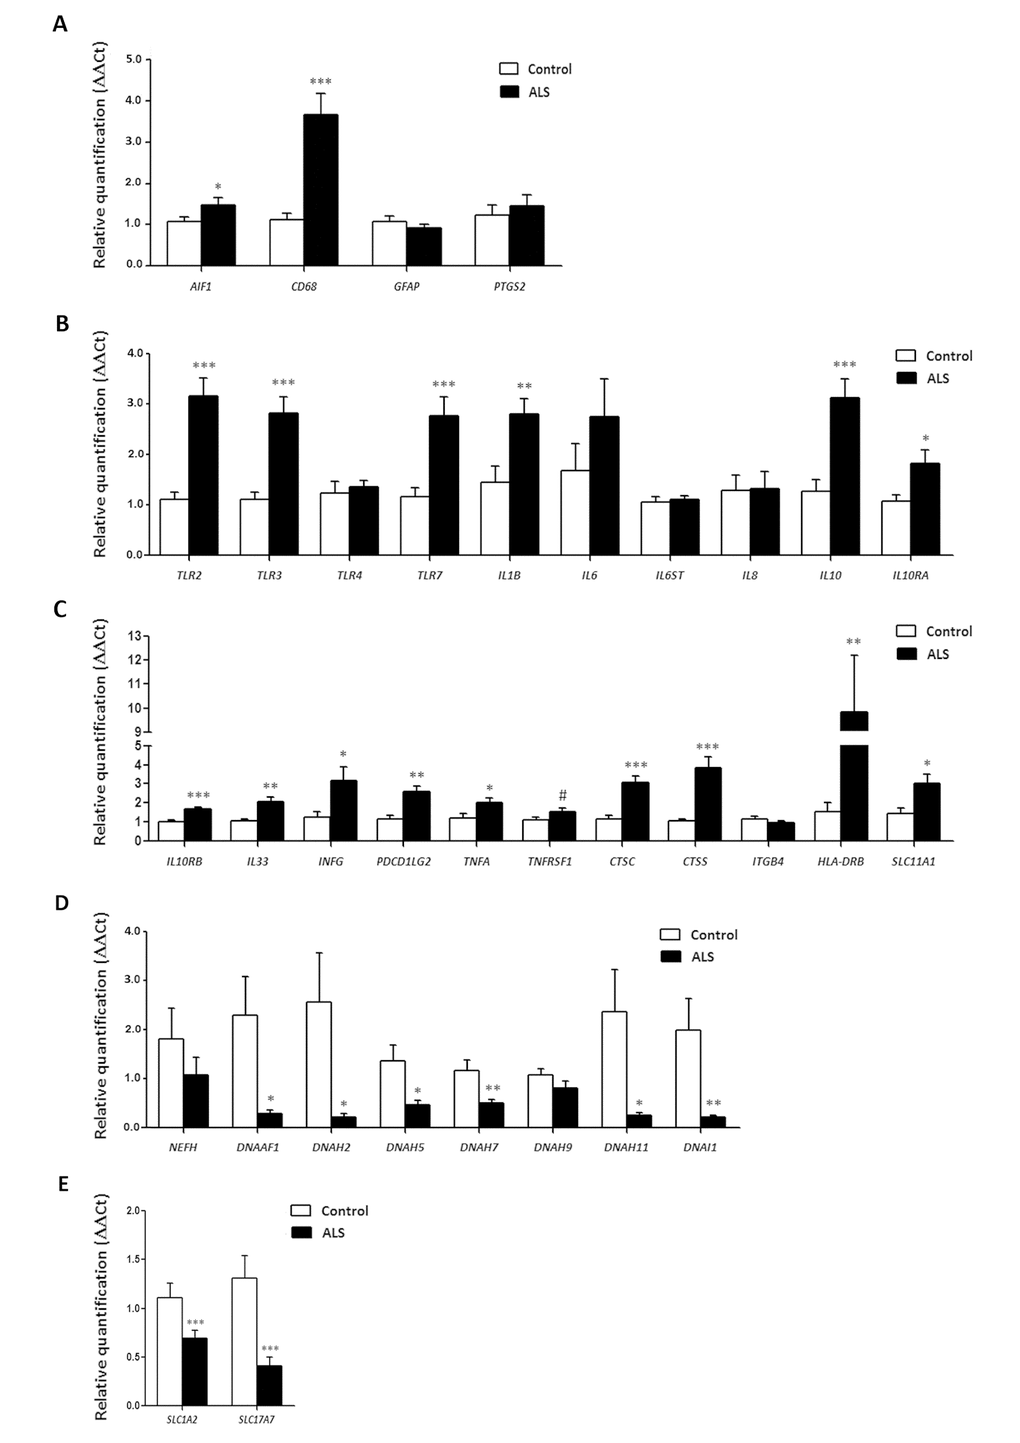 mRNA expression levels of selected deregulated genes identified by microarray analysis in the anterior horn of the spinal cord in ALS determined by TaqMan RT-qPCR assays. (A) general glial markers; (B-C) mediators of the inflammatory response; and (D) axolemal components. Up of AIGF1 and CD68, toll-like receptors, cytokines and receptors, chemokines and other mediators of the innate and adaptative inflammatory responses. Axolemal genes, excepting NEFH, which shows a non-significant trend to decrease, are significantly down-regulated. (E) glutamate transporter coding genes. The significance level is set at * p 